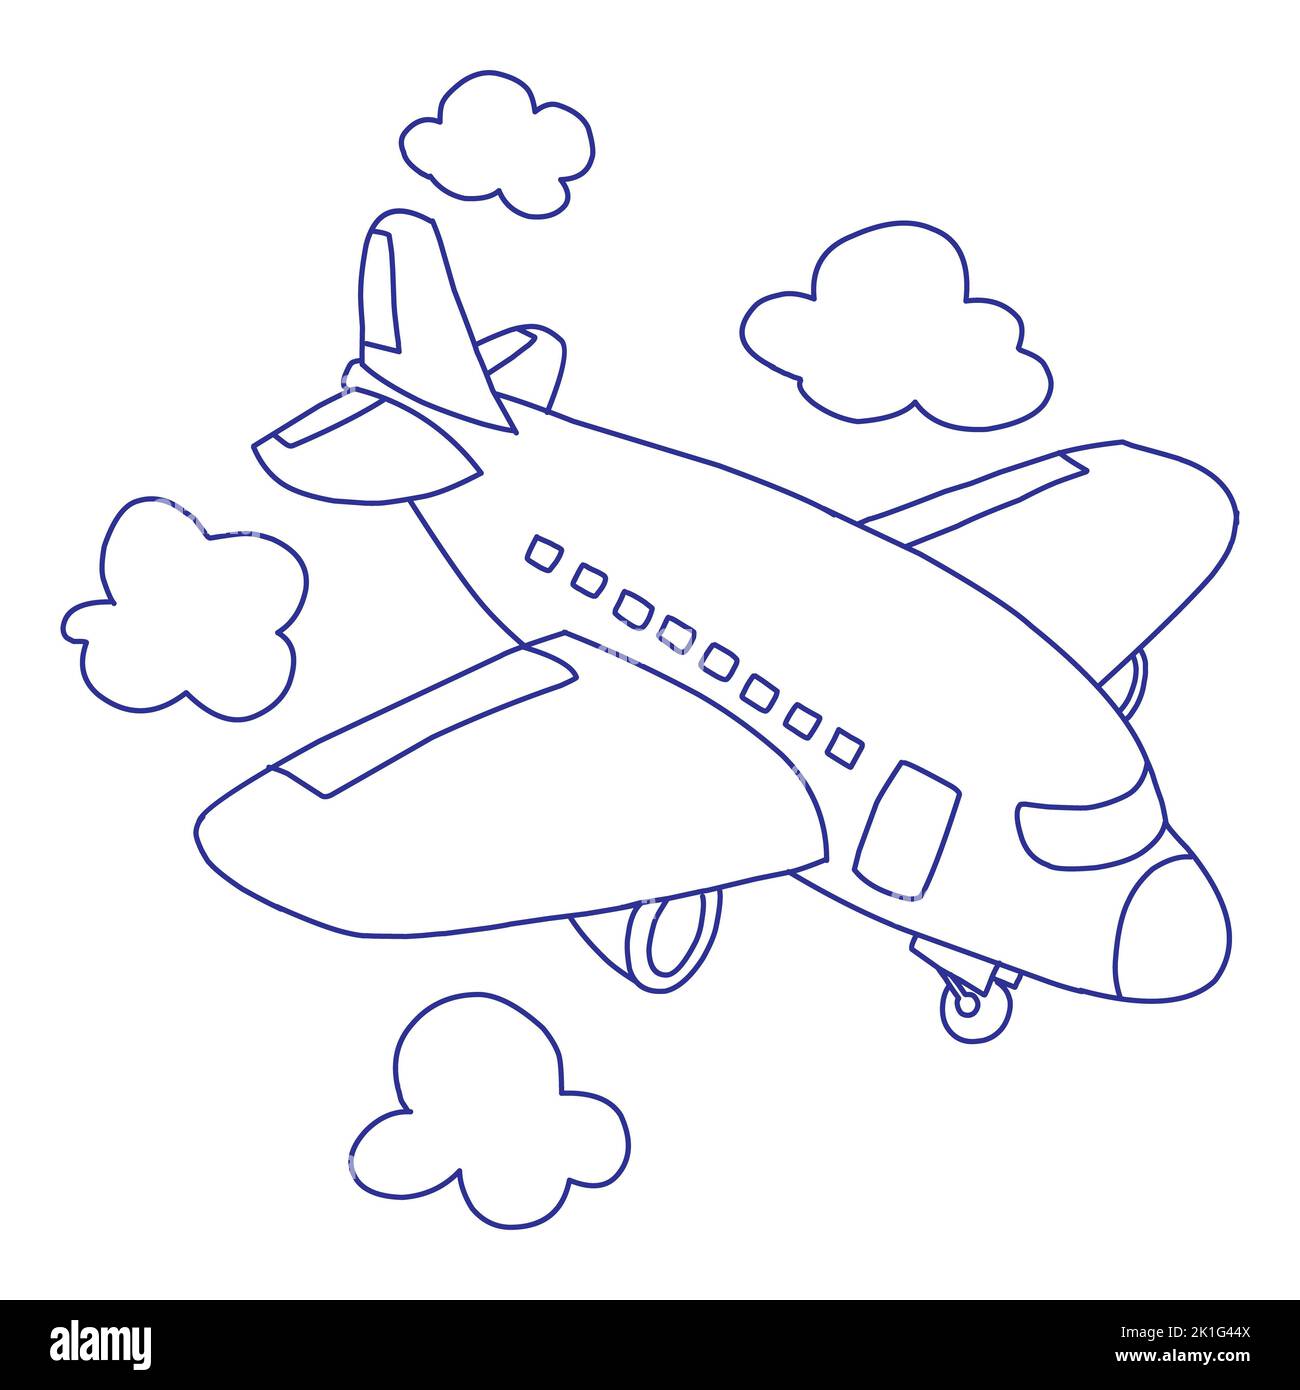 Cartoon doodle linear airplane isolated on white background. Sky transportation icon. Stock Photo